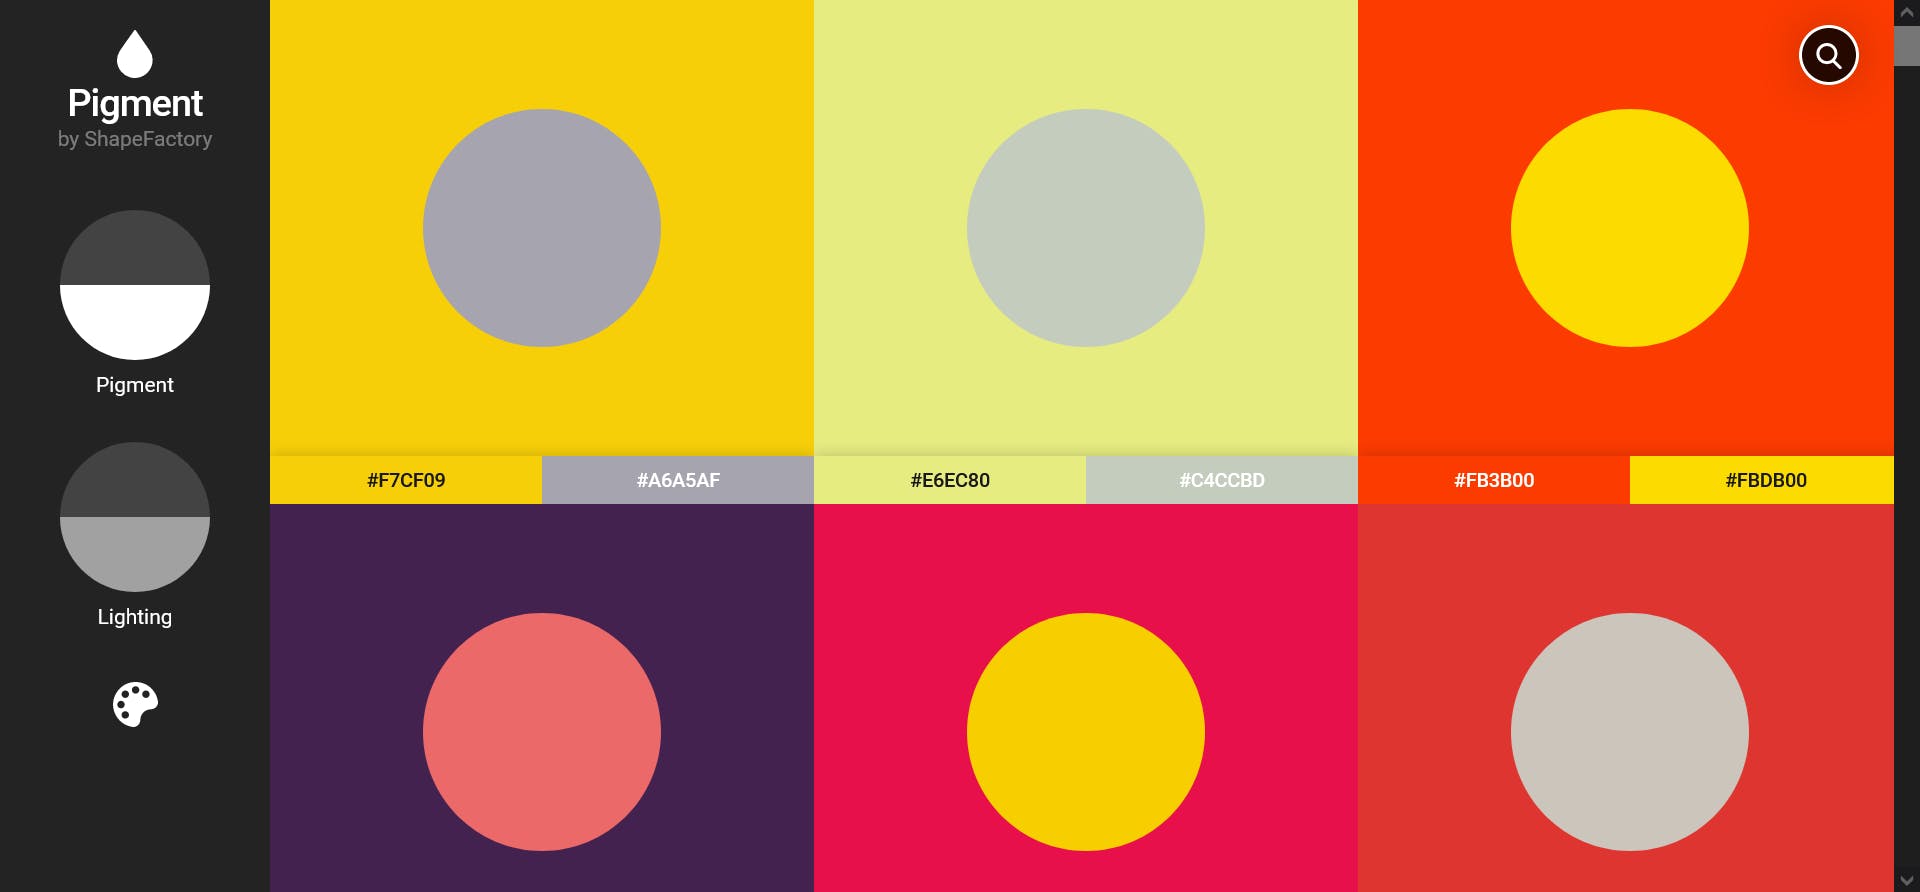 Screenshot 2021-04-30 at 08-13-55 Pigment by ShapeFactory Simple Color Palette Generator.png